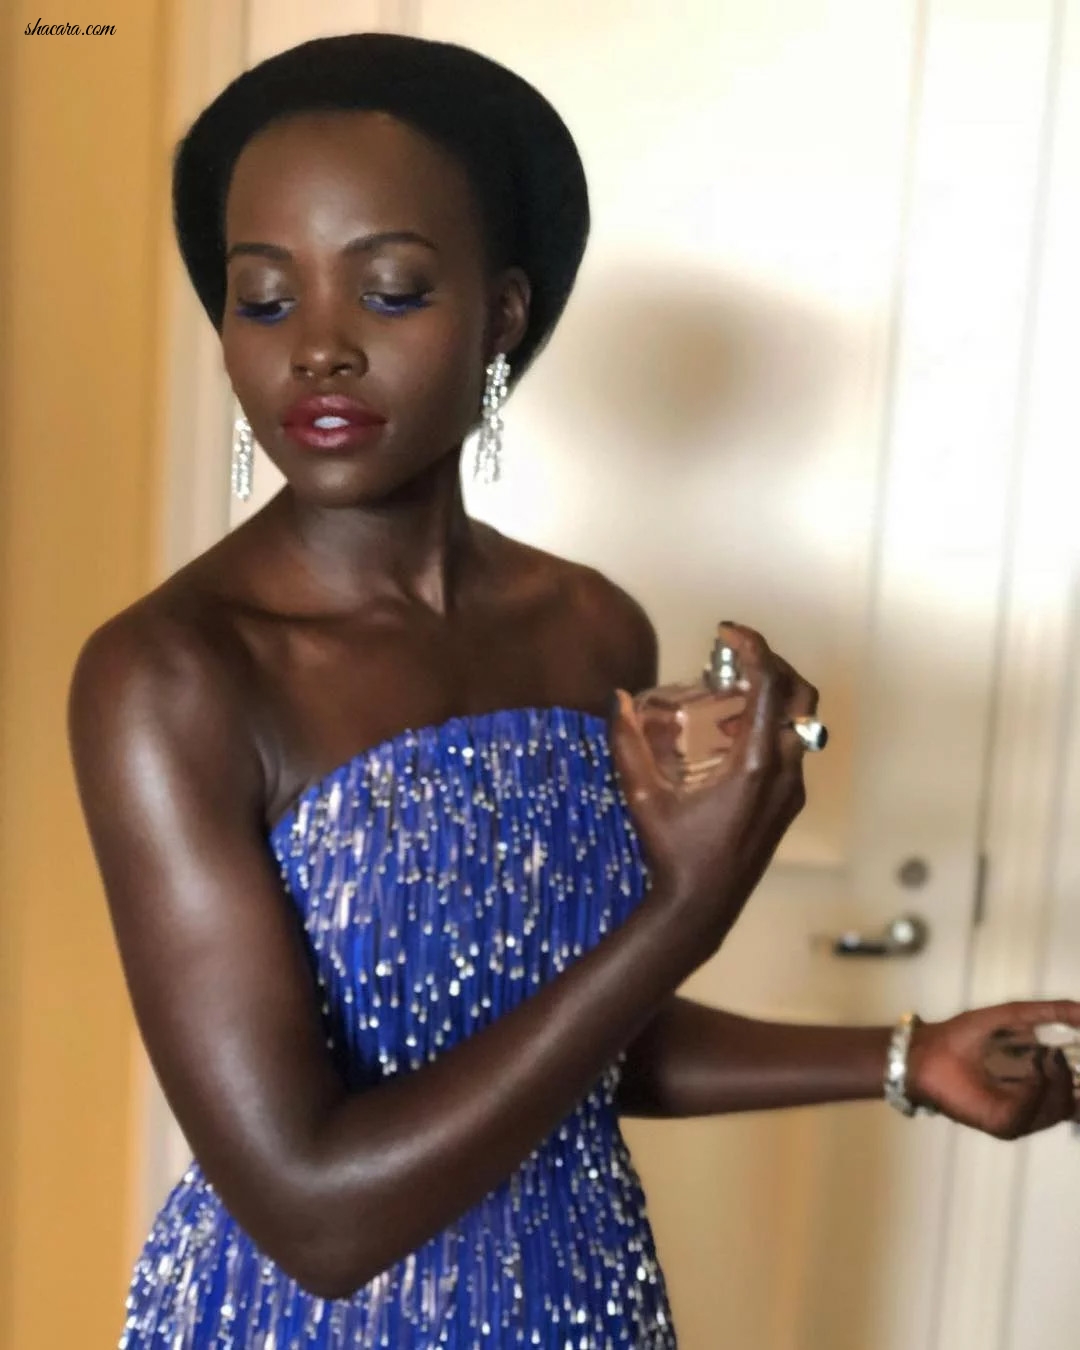 A Break Down And Look Into Lupita Nyong’o’s Calvin Klein Dress Made With 20,000 Silver Beads